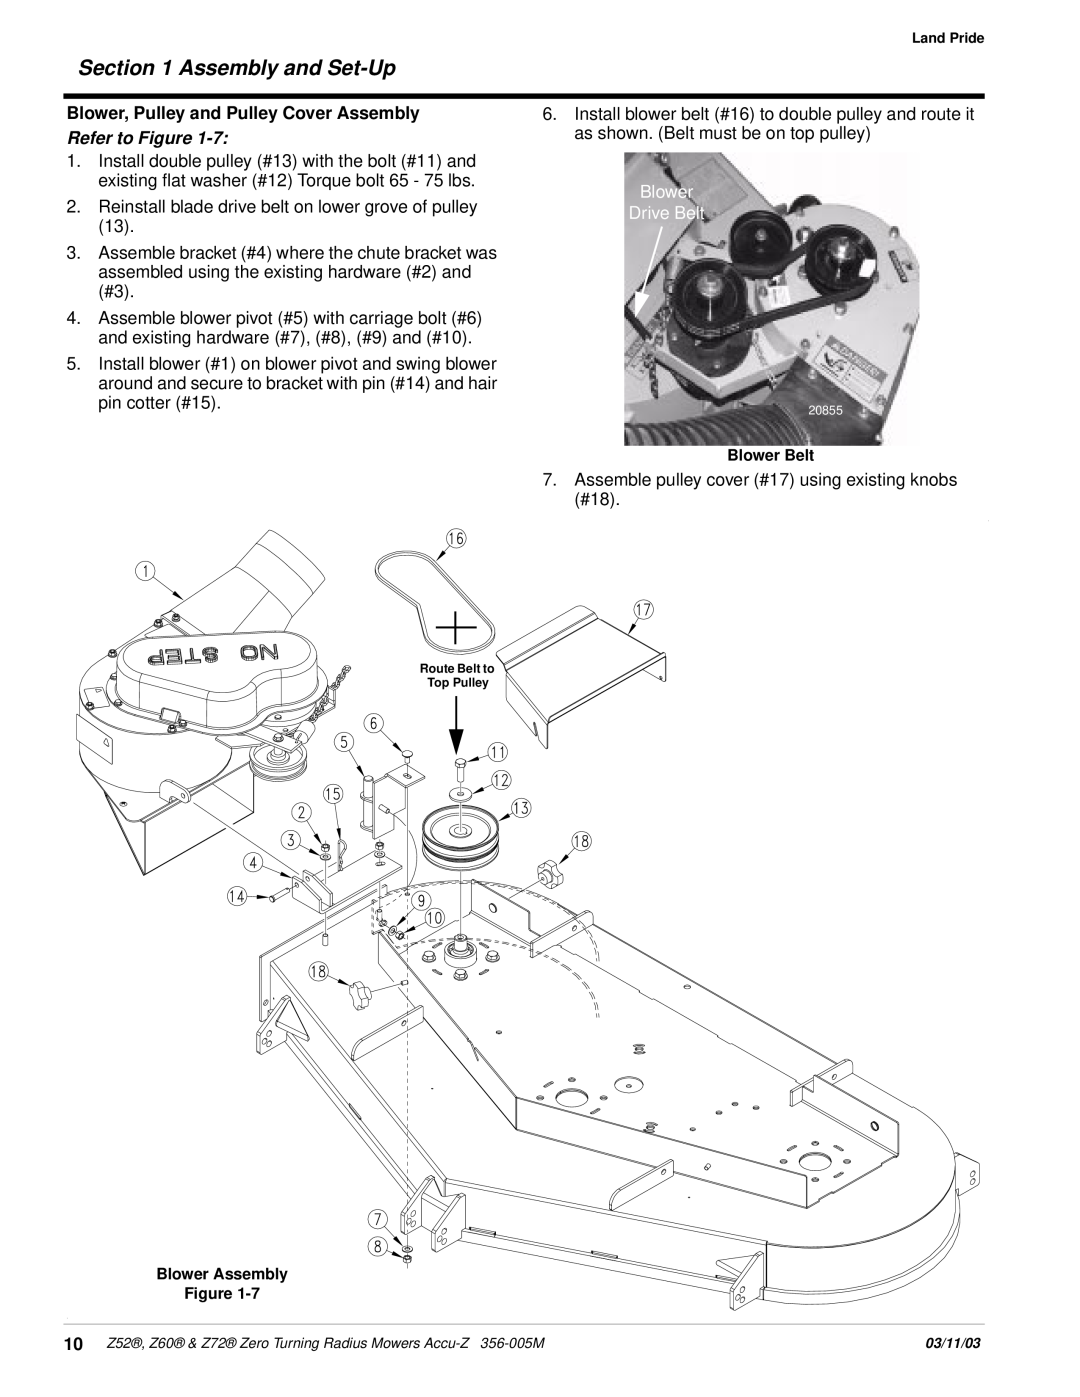 Land Pride Z52 , Z60, Z72 manual Assembly and Set-Up, Blower, Pulley and Pulley Cover Assembly, Refer to Figure 